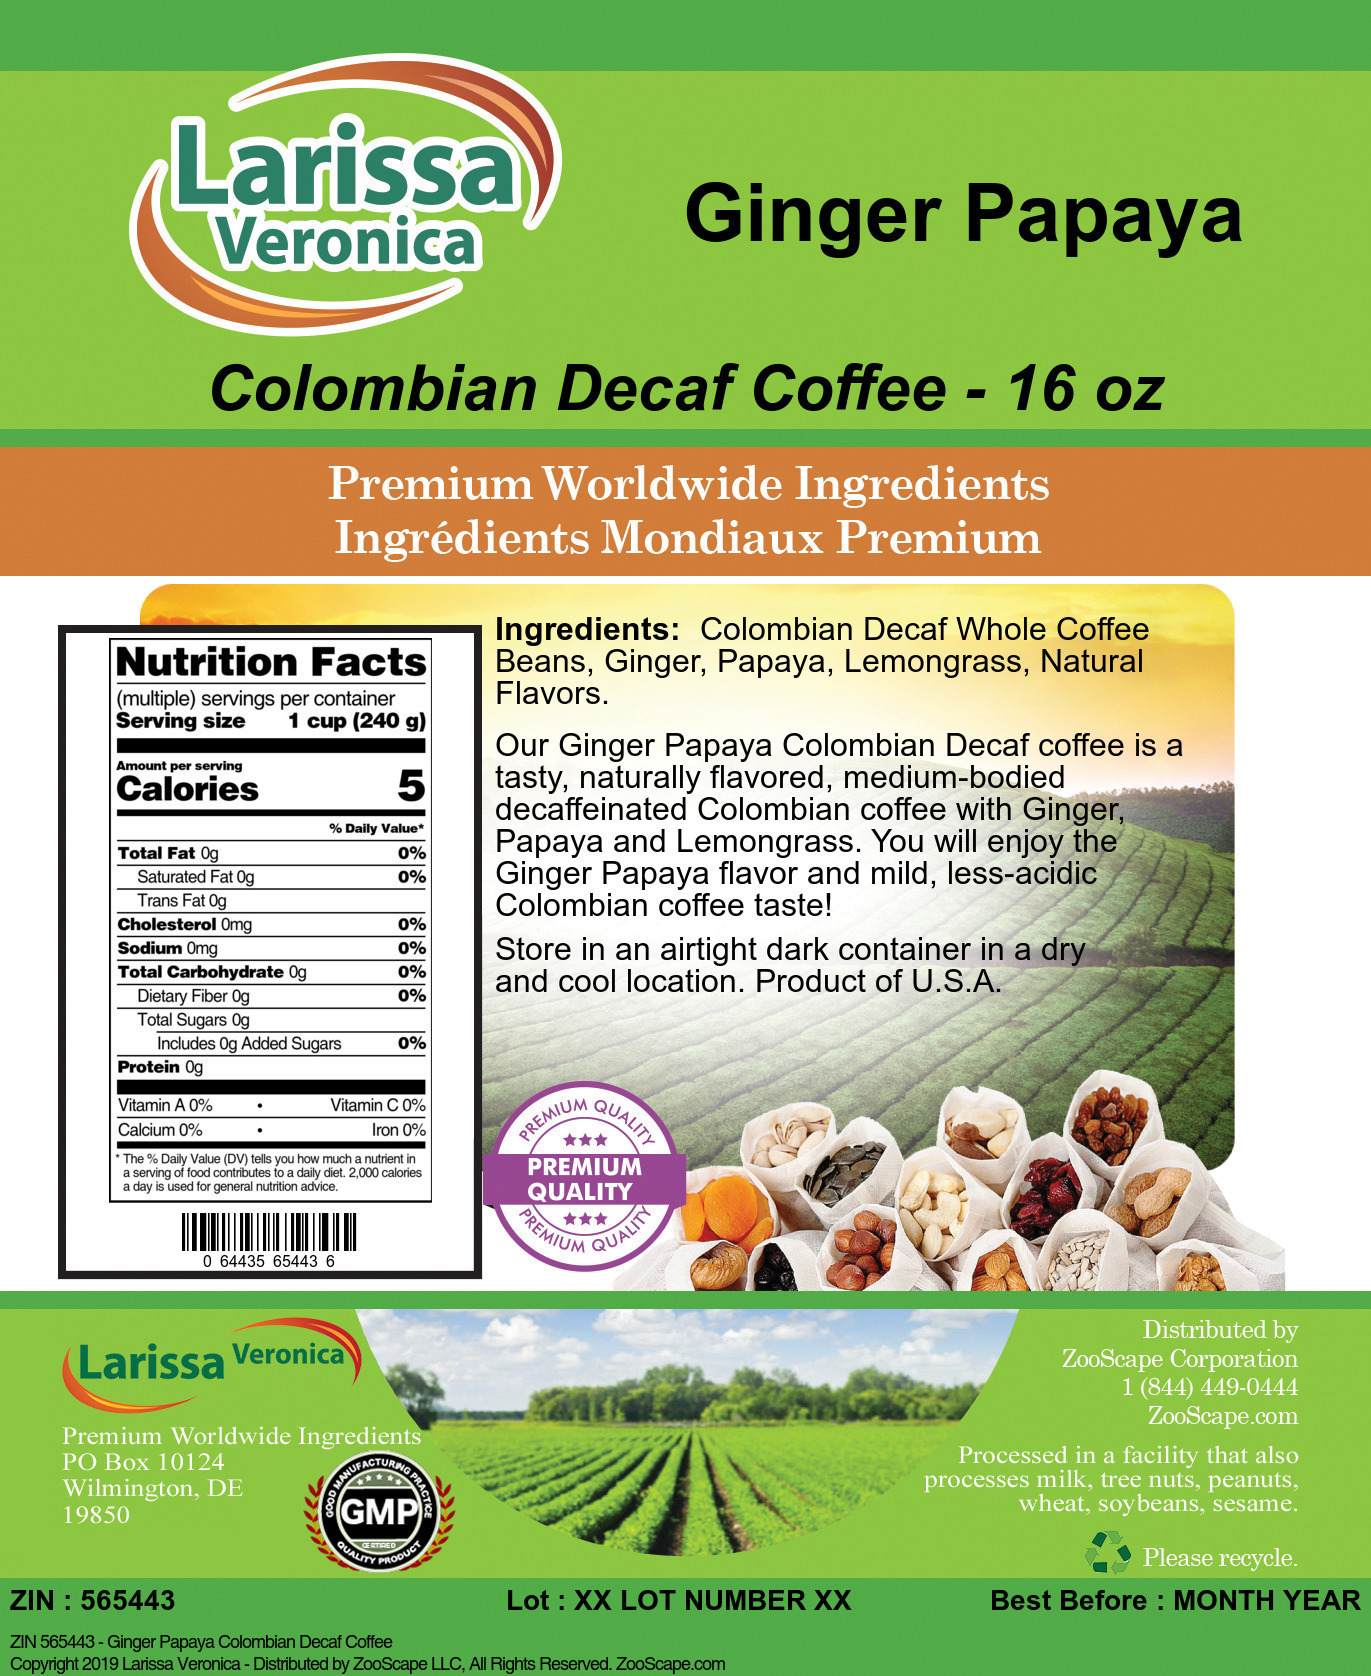 Ginger Papaya Colombian Decaf Coffee - Label